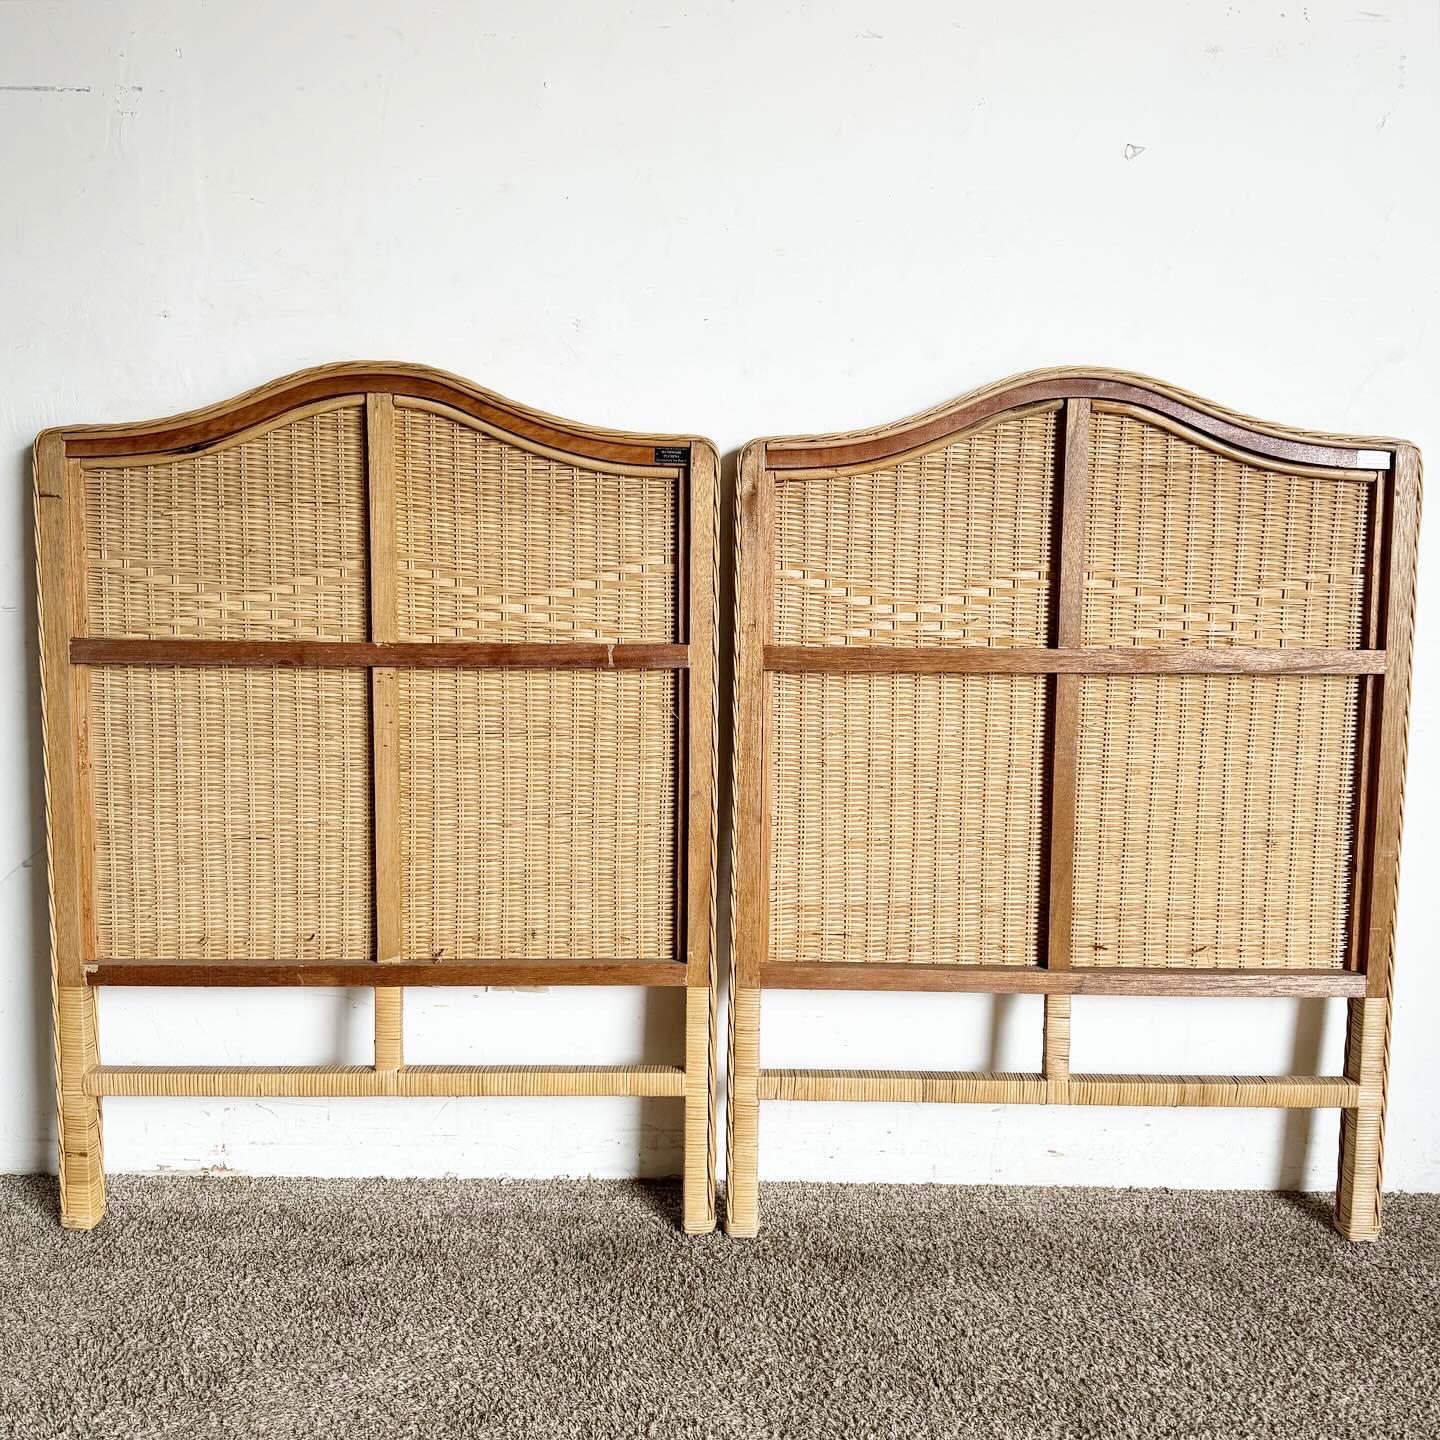 Boho Chic Wicker Rattan Twin Headboards - a Pair In Good Condition For Sale In Delray Beach, FL